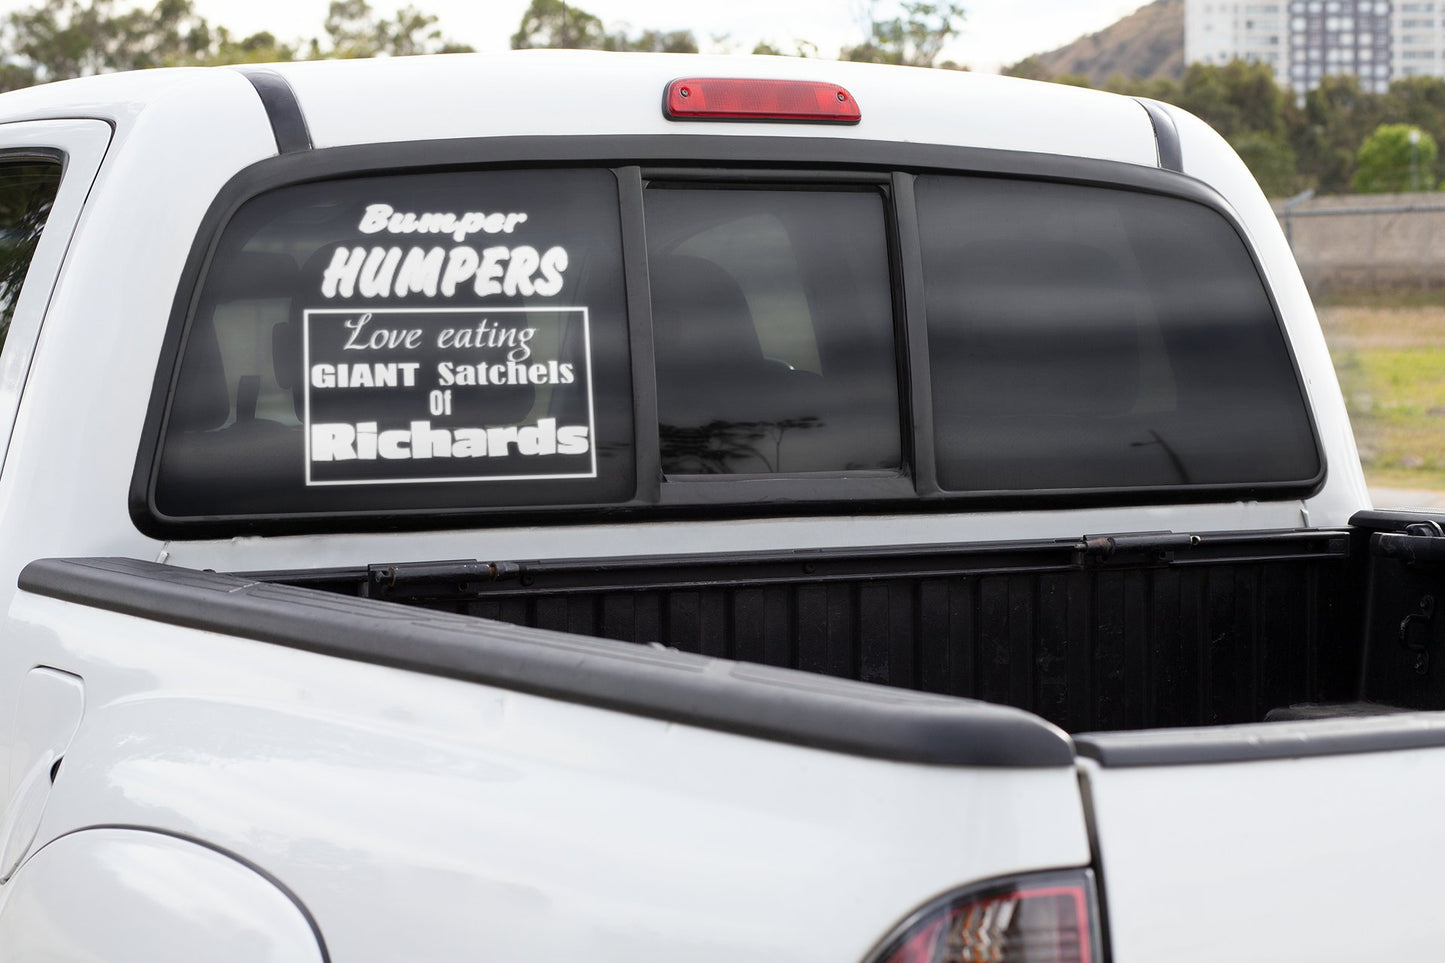 Bumper Humpers love eating giant satchels of Richards Vinyl Decal boss gift car decor dads day gift gift for dad gift for grandpa gift for her gift for him gift for husband gift for mom gift for sister gift for wife moms gift Unique gift Vinyl Vinyl decals vinyl sticker Vinyl stickers window decal window sticker